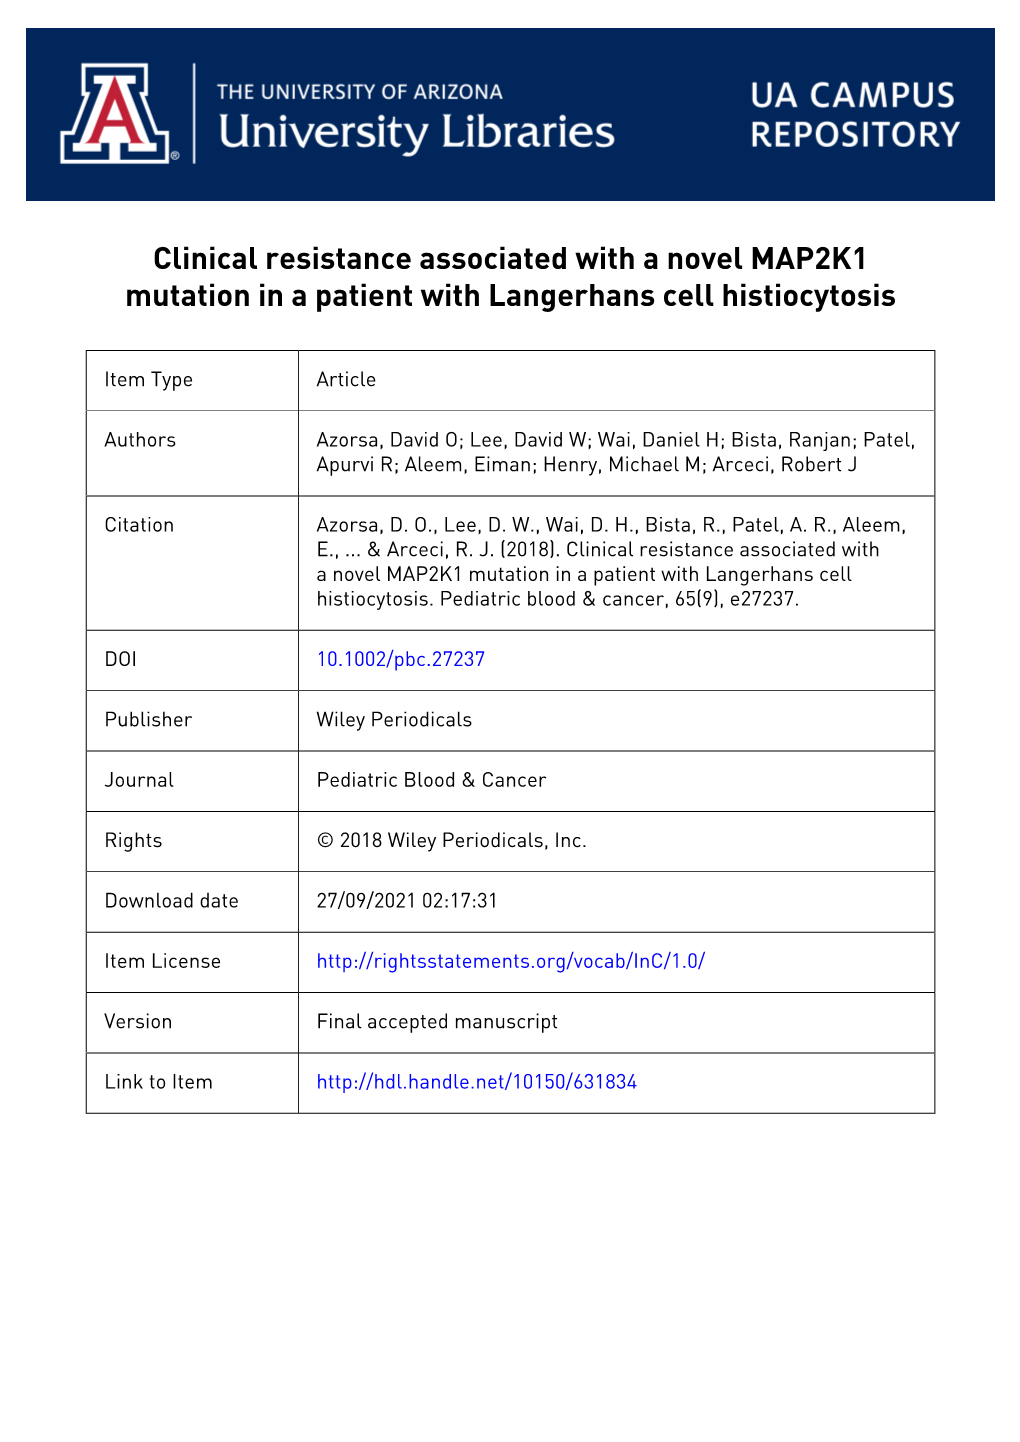 1 Clinical Resistance Associated with a Novel MAP2K1 Mutation in a Patient with Langerhans Cell Histiocytosis David O. Azorsa1,2